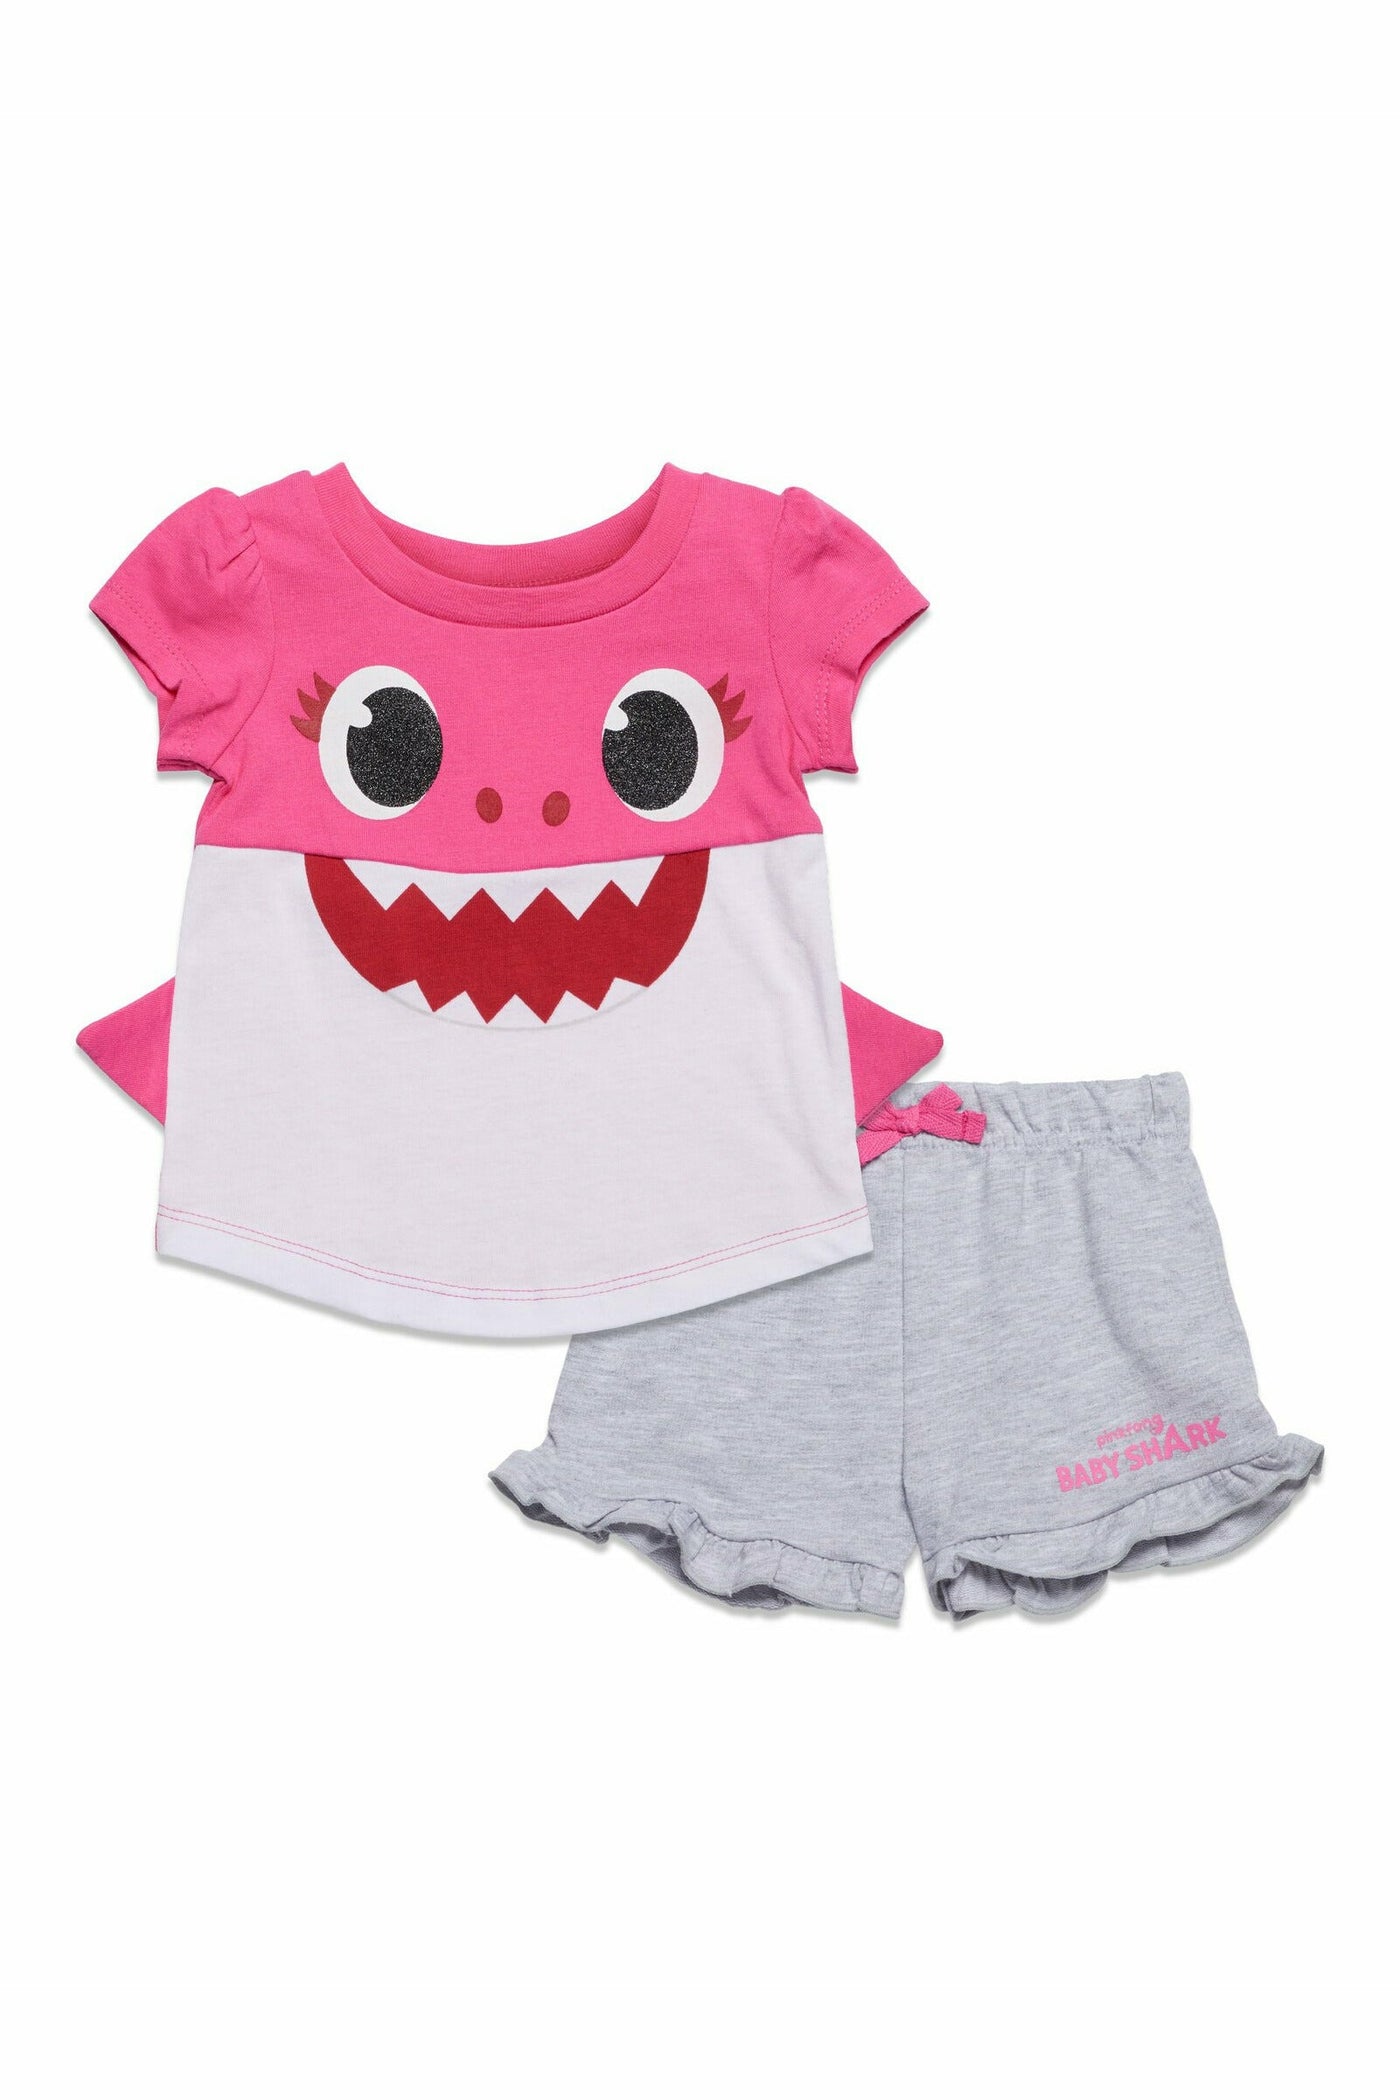 Pinkfong Mommy Shark French Terry Graphic T-Shirt & French Terry Shorts Set